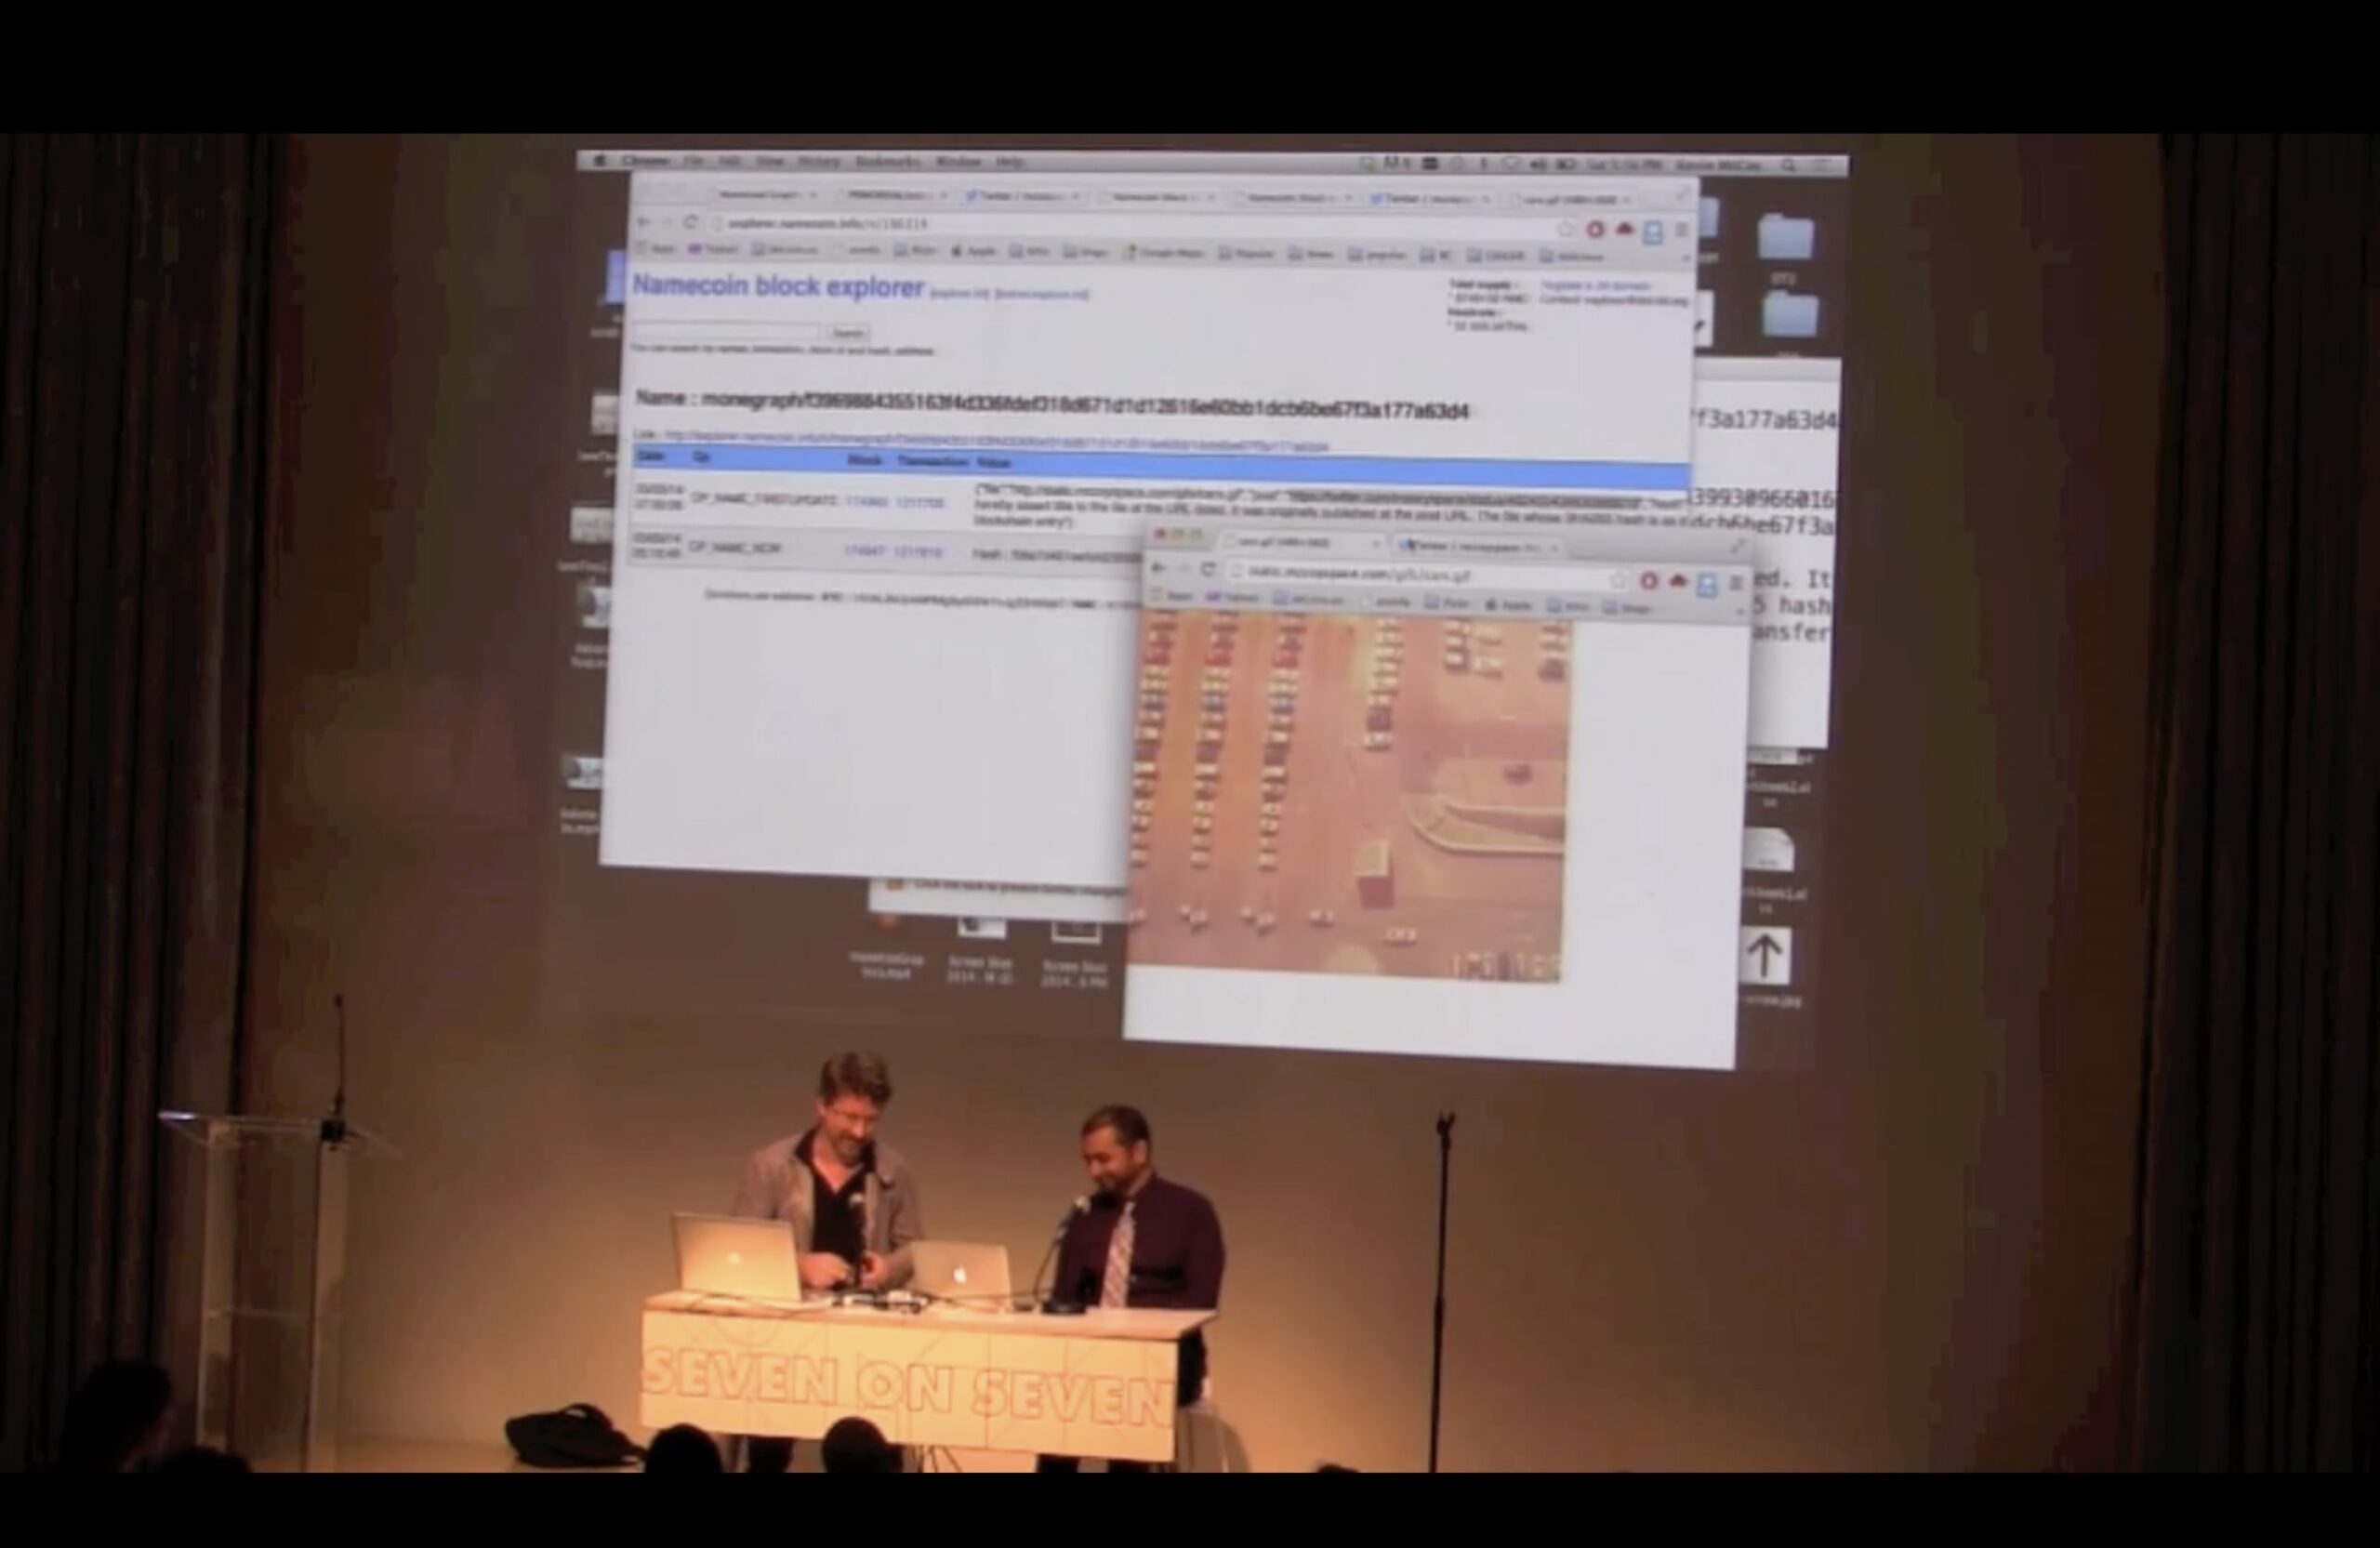 An image of two men sitting at a desk on stage with a presentation projected on the wall behind them